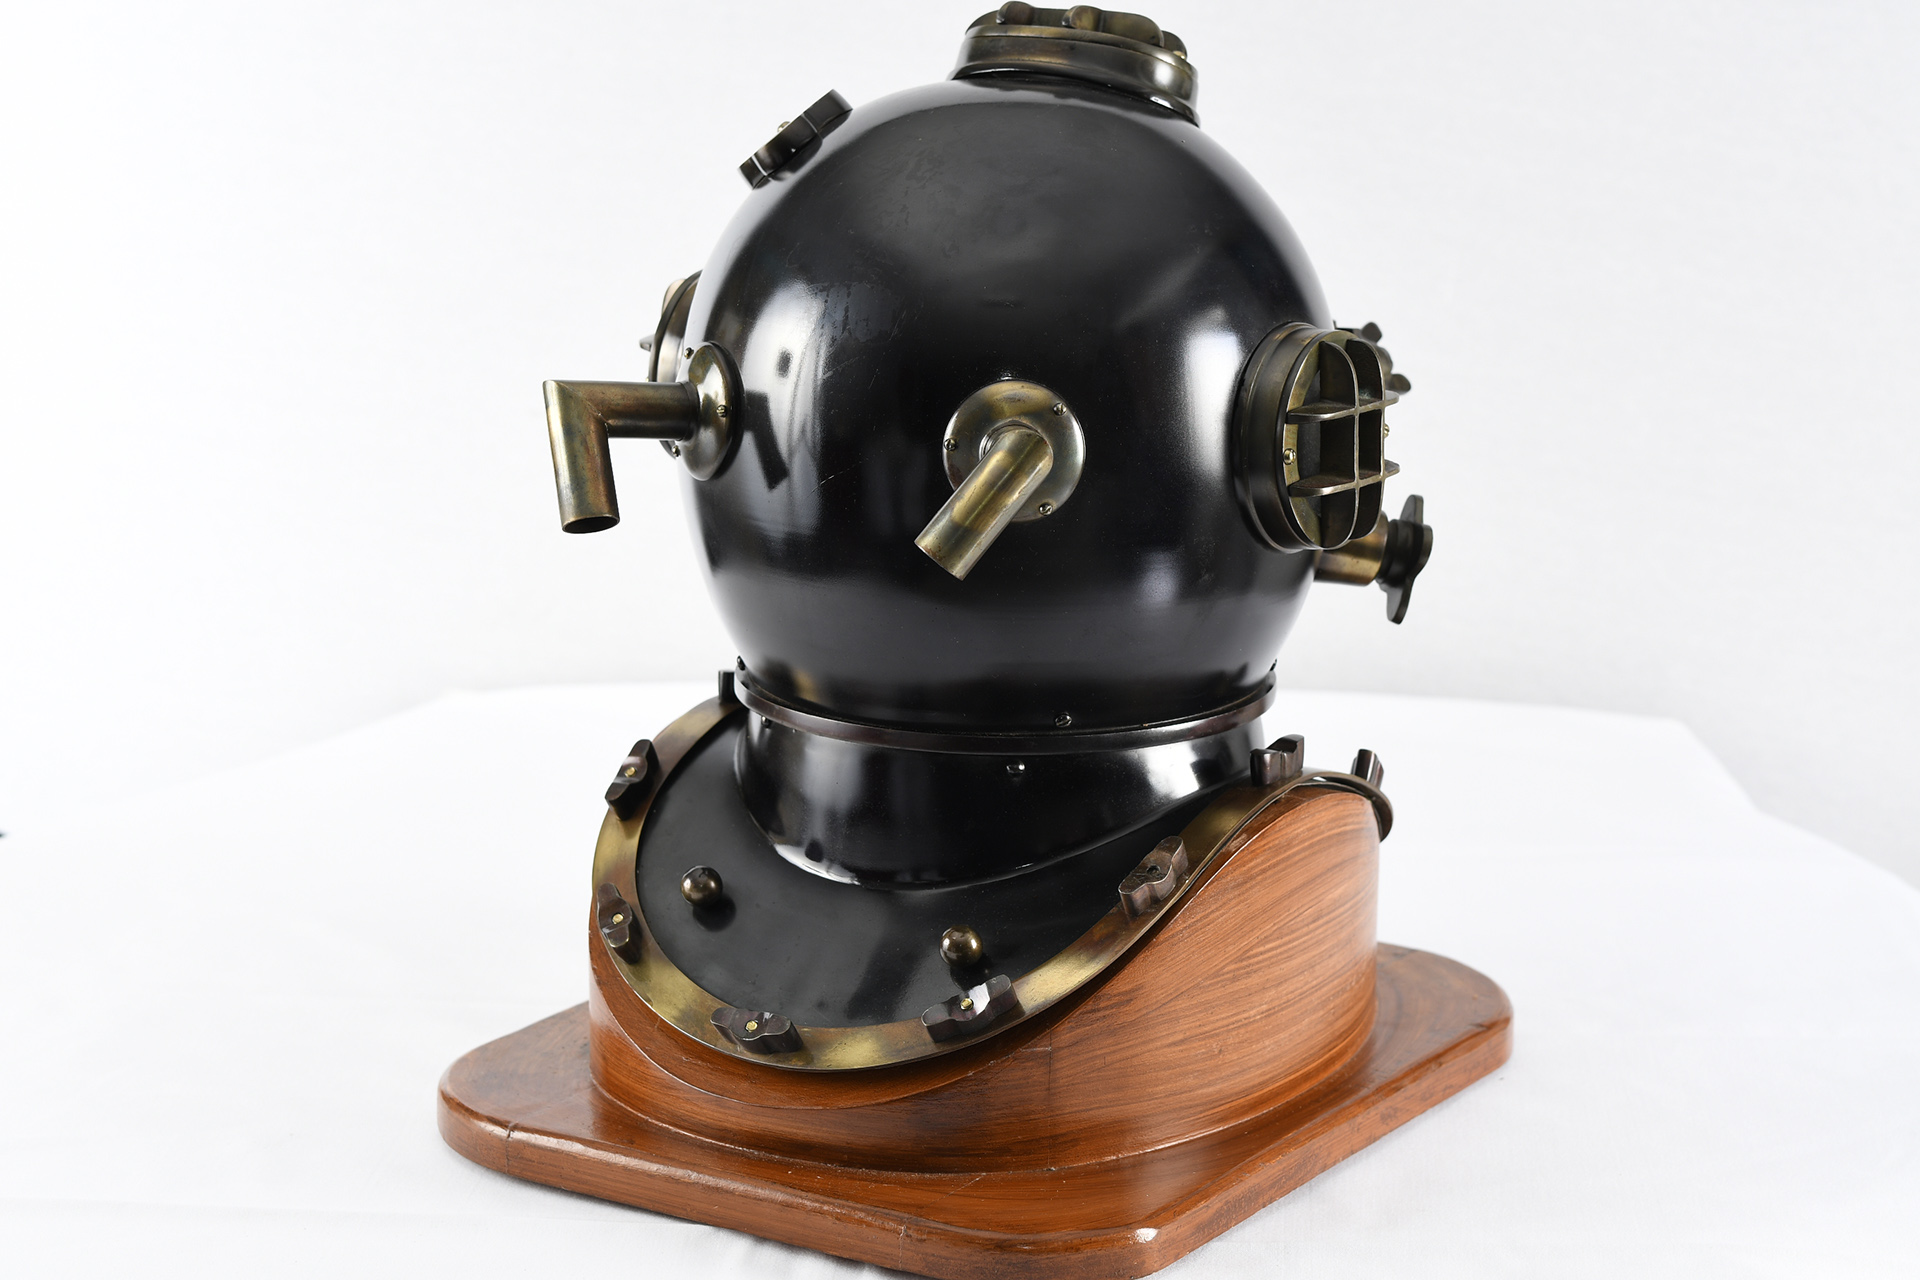 Large 20" Divers Helmet on Wood Base with Brass Fittings.